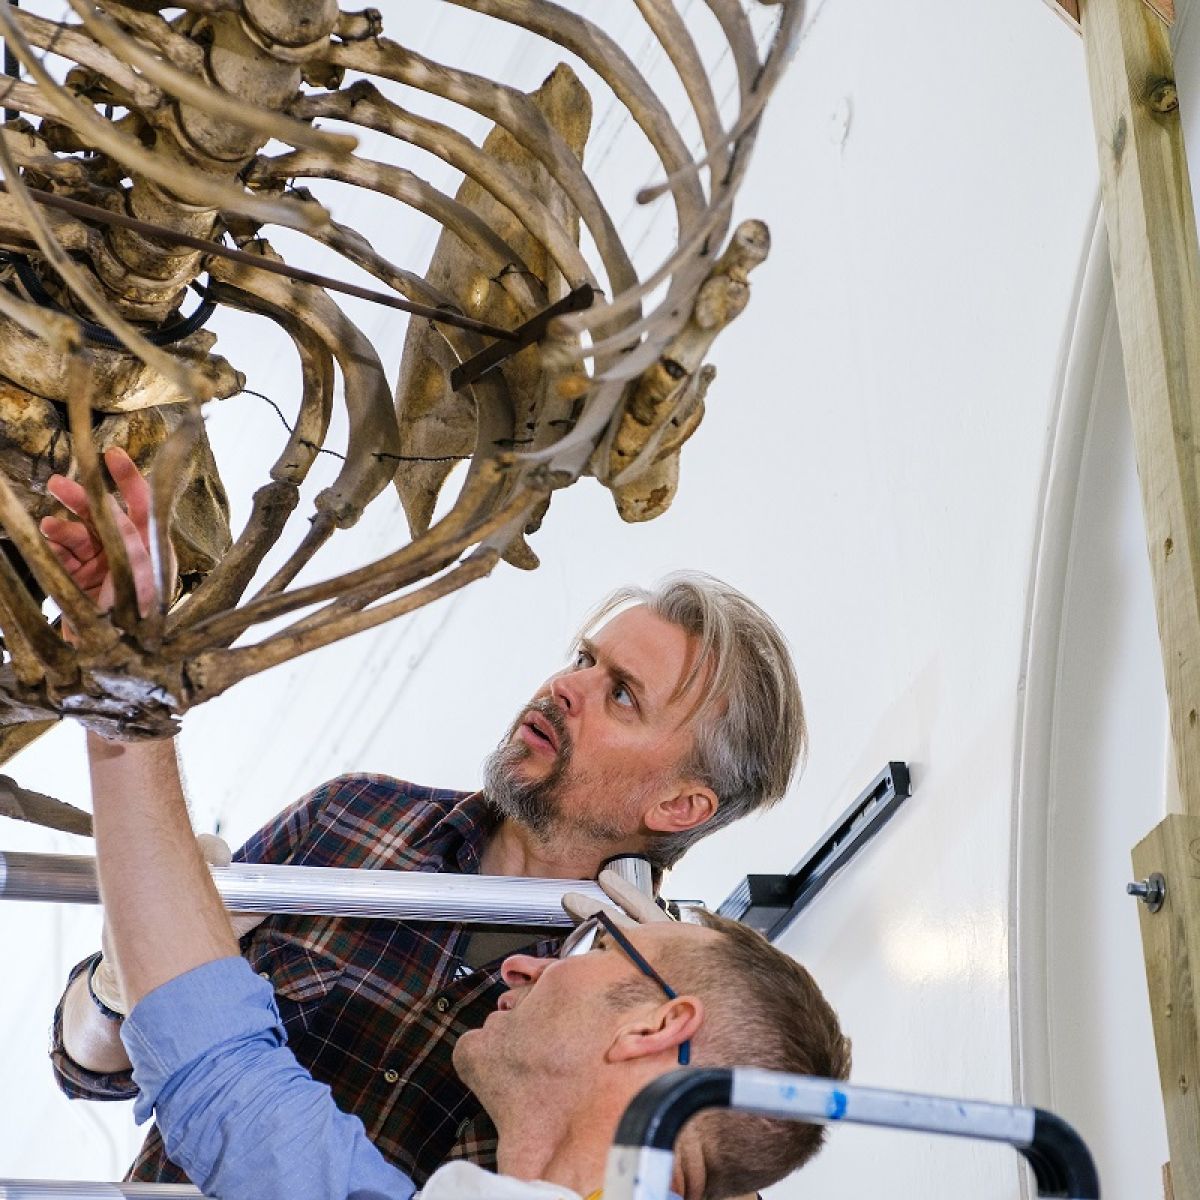 Nigel Larkin And Phil Rye Dismantling Skeletons That Are Suspended From The Ceiling